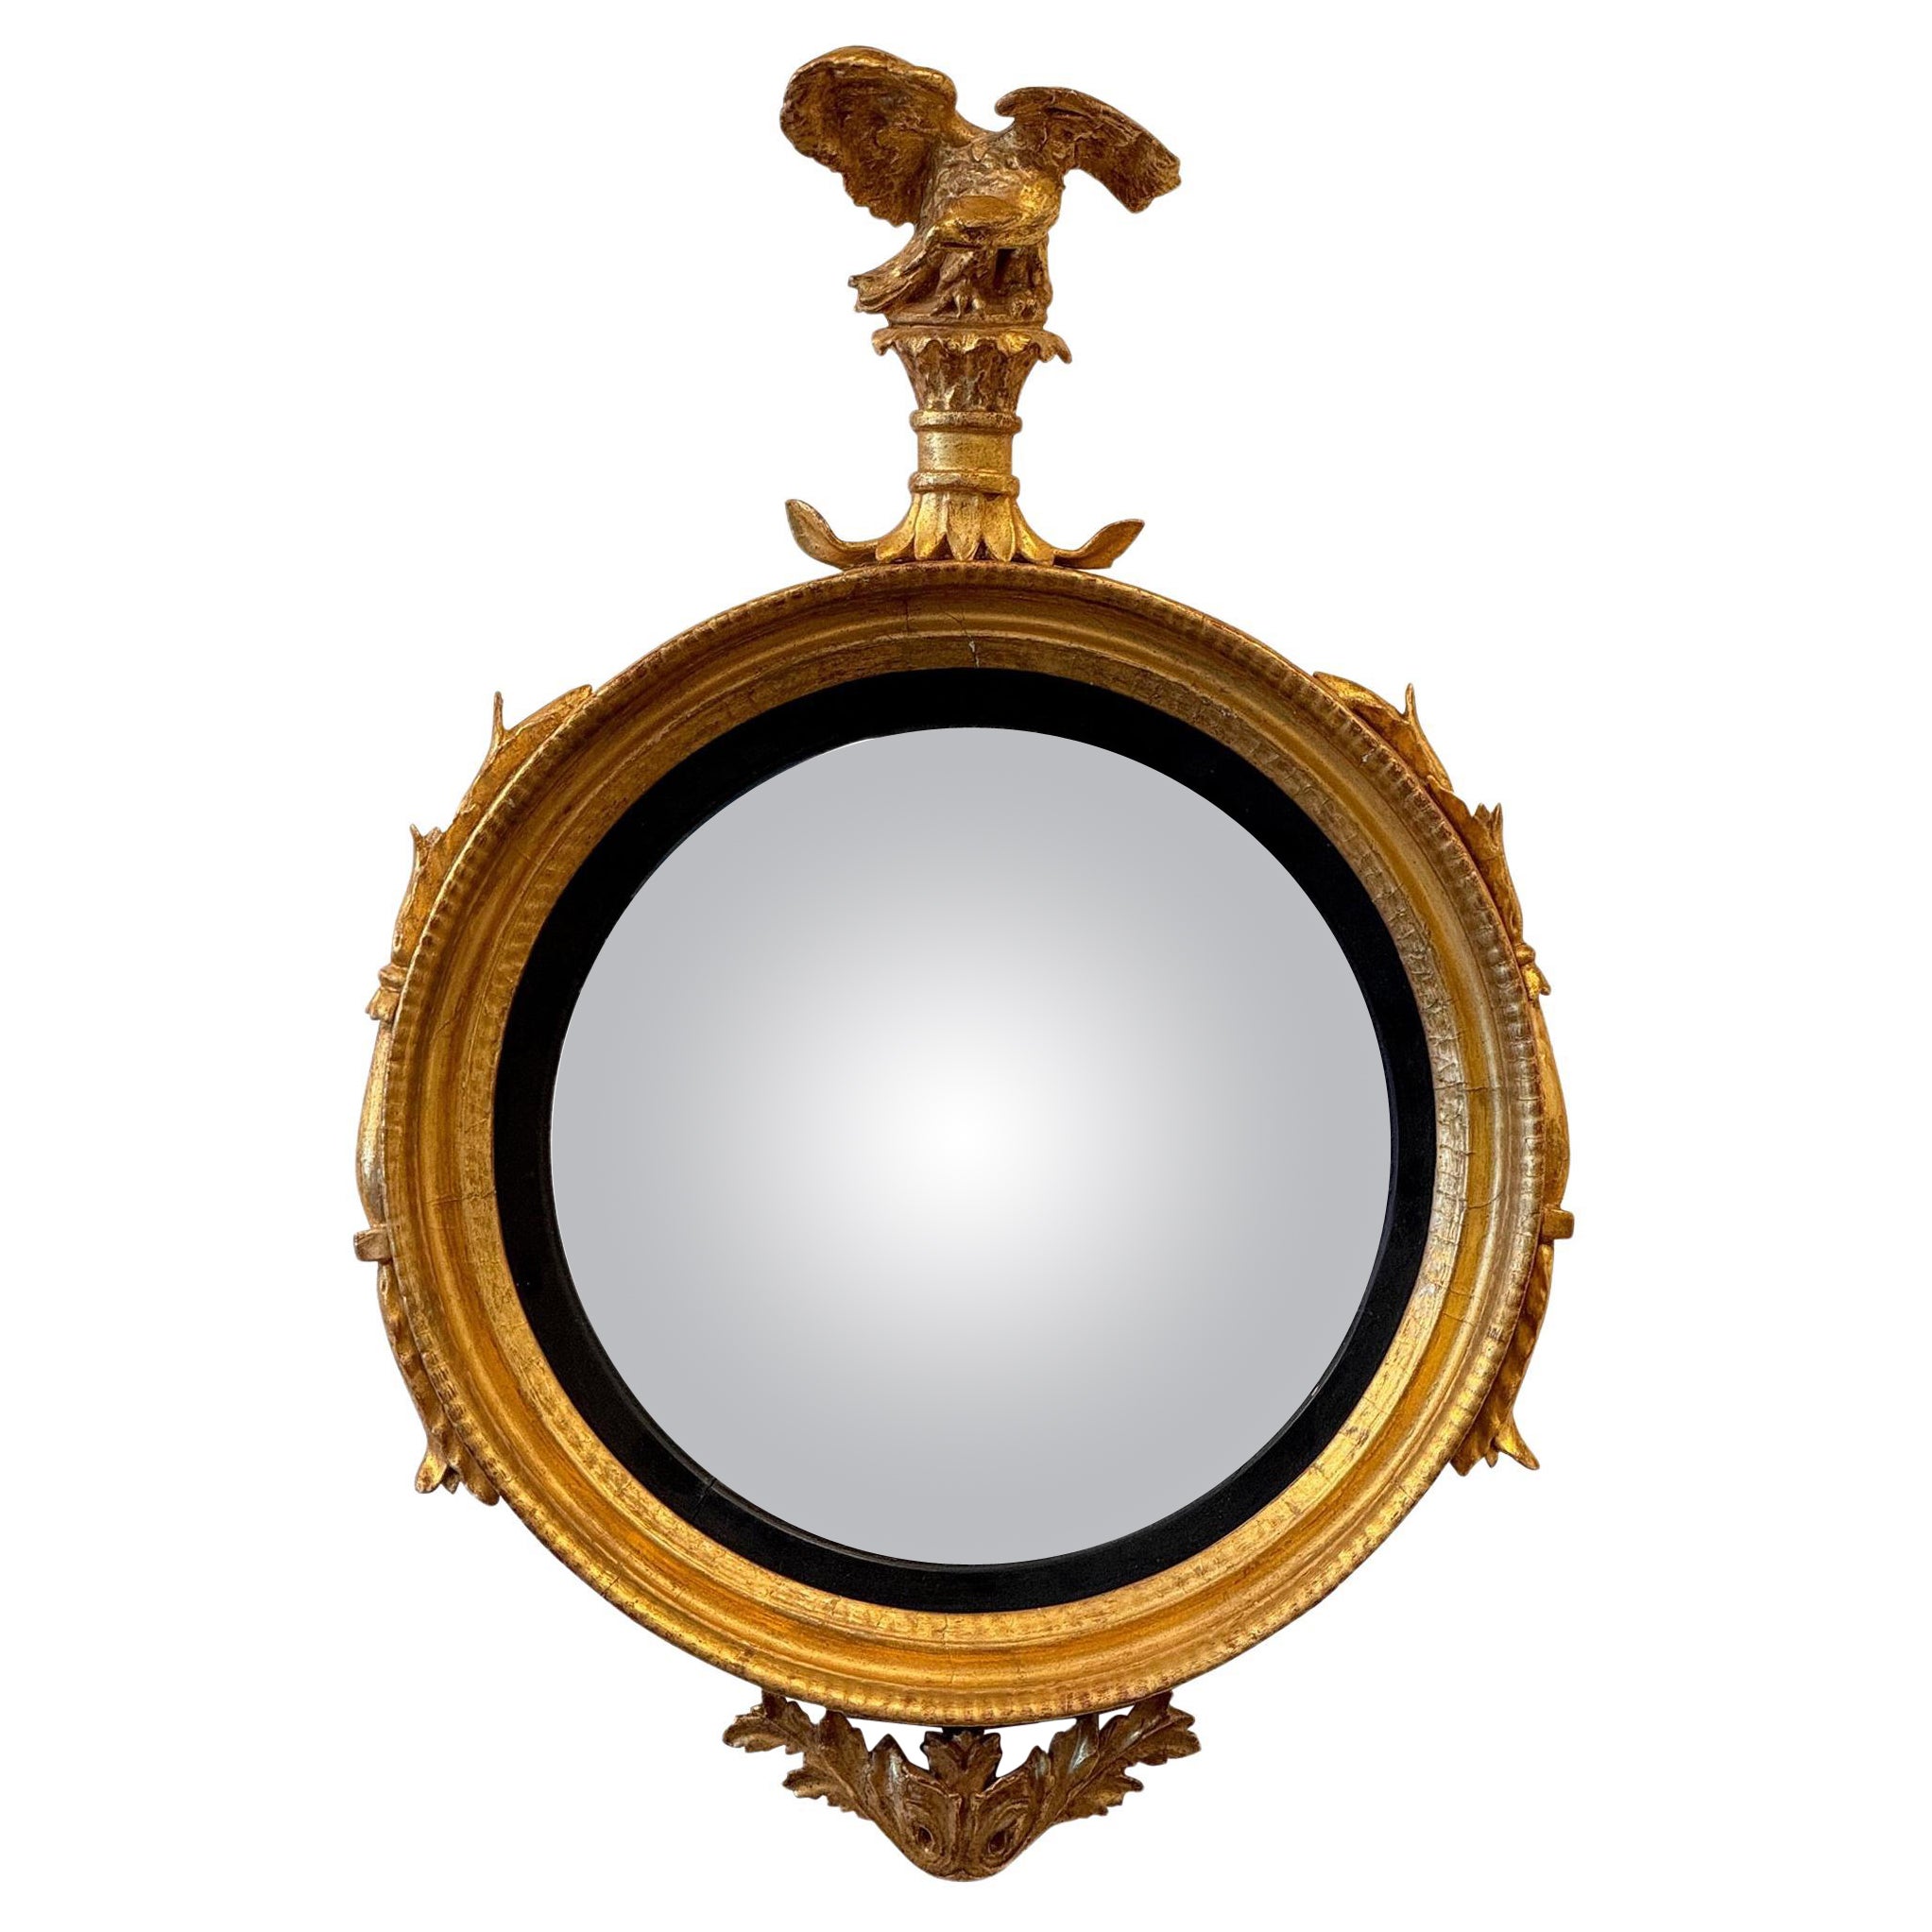 19th Century Federal Giltwood Convex Eagle Mirror For Sale